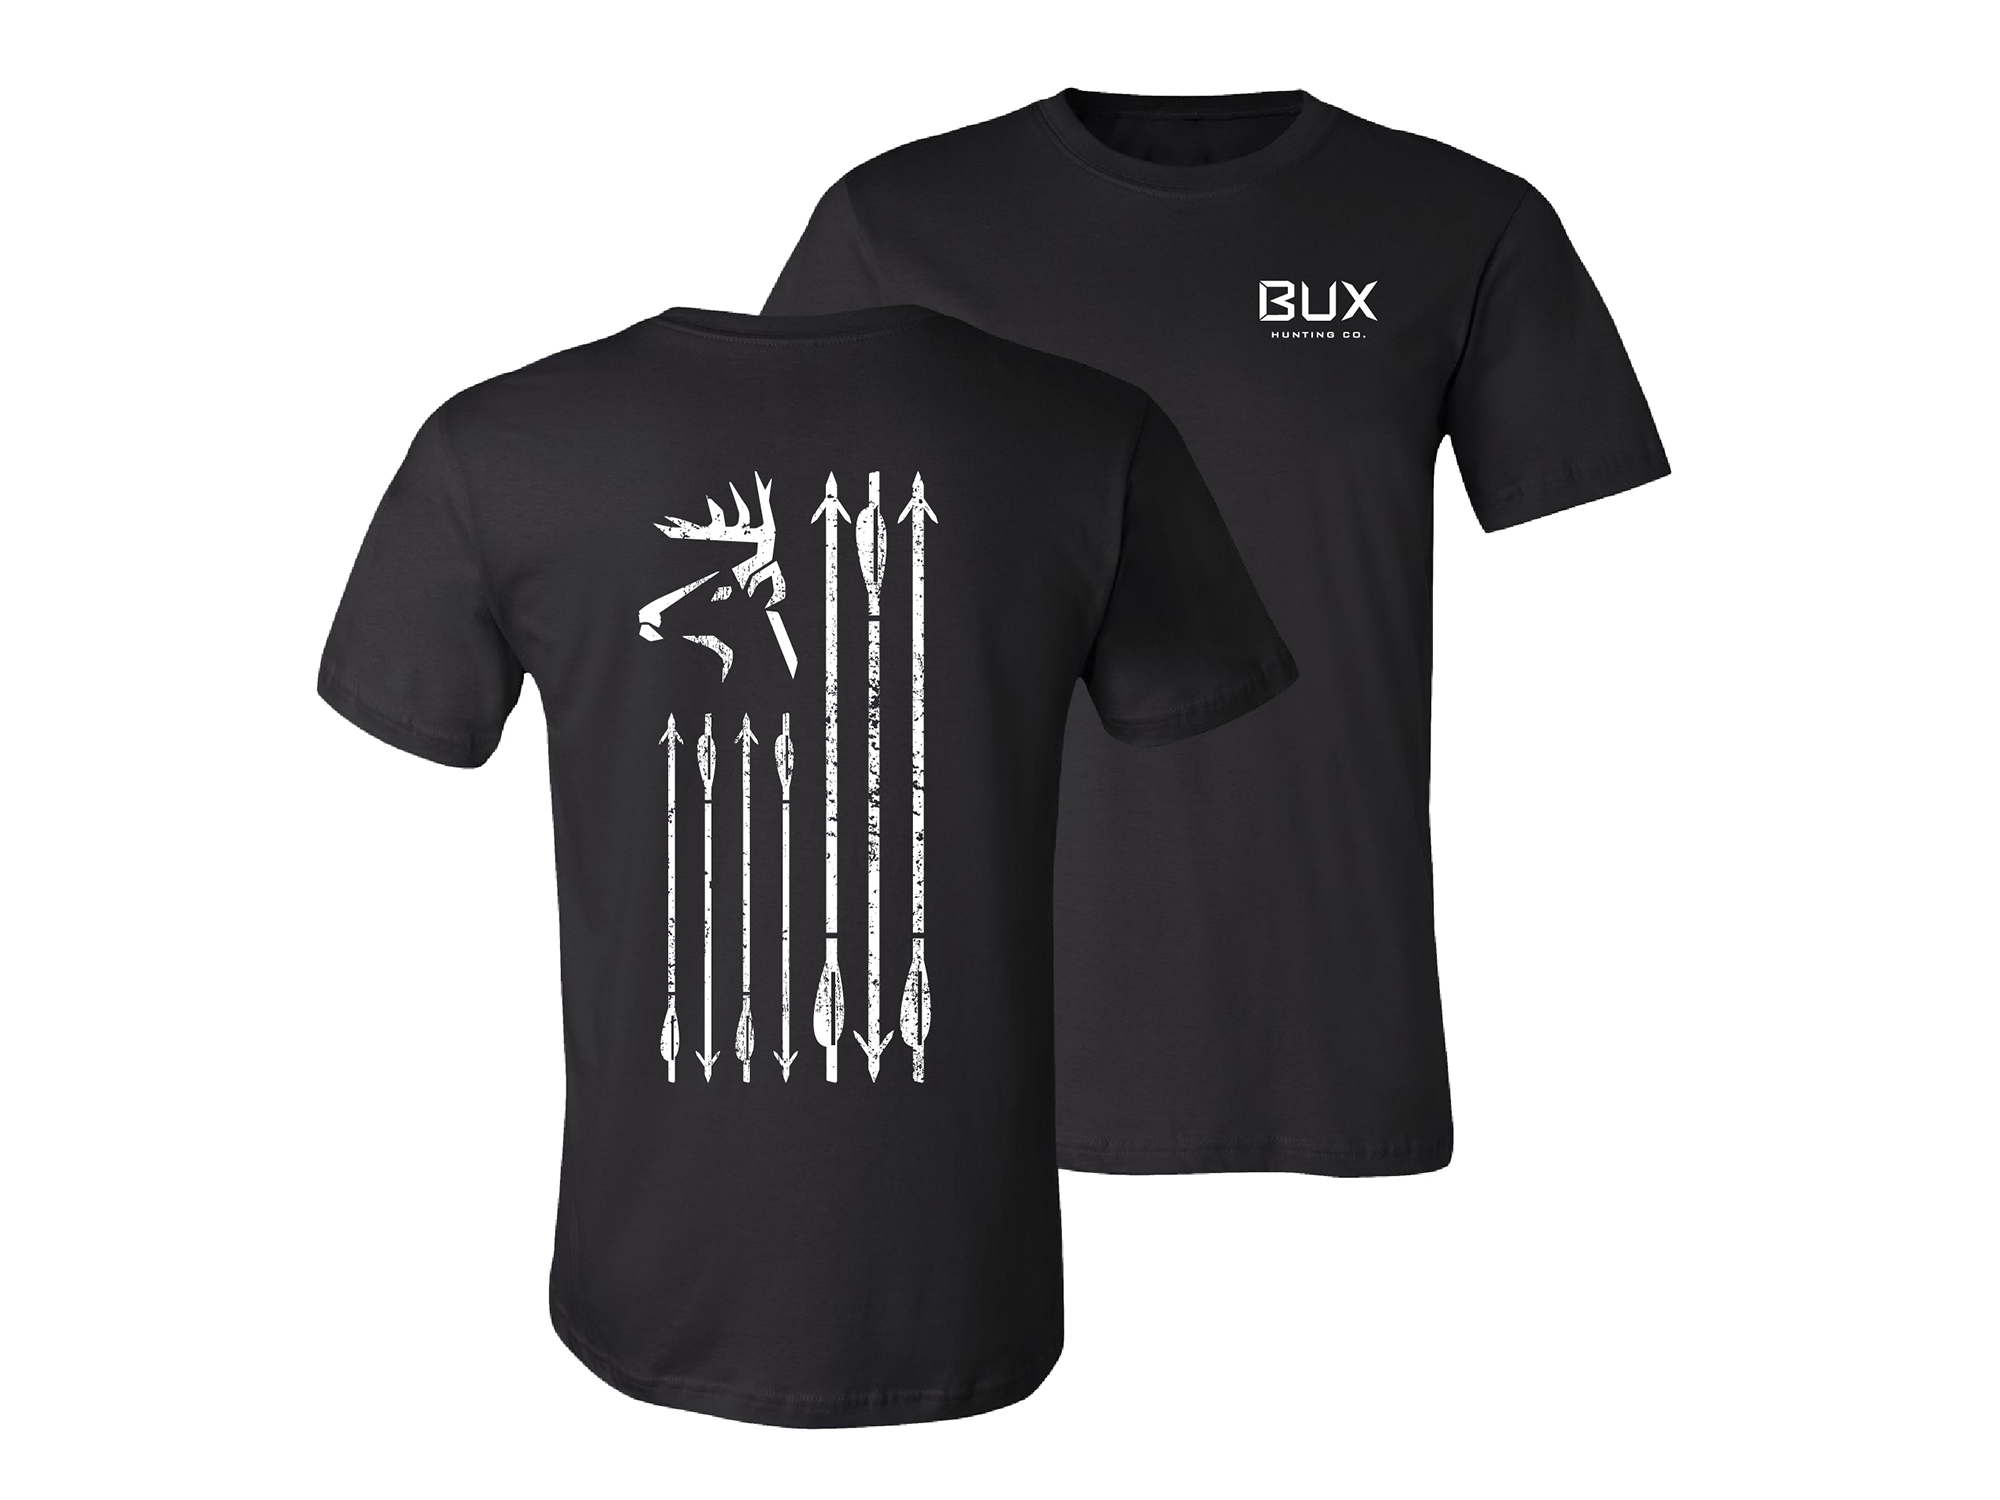 iKRIX-off-white-t-shirts-cotton-t-shirt-with-logo-and-arrow -prints-00000142603f00s003.jpg